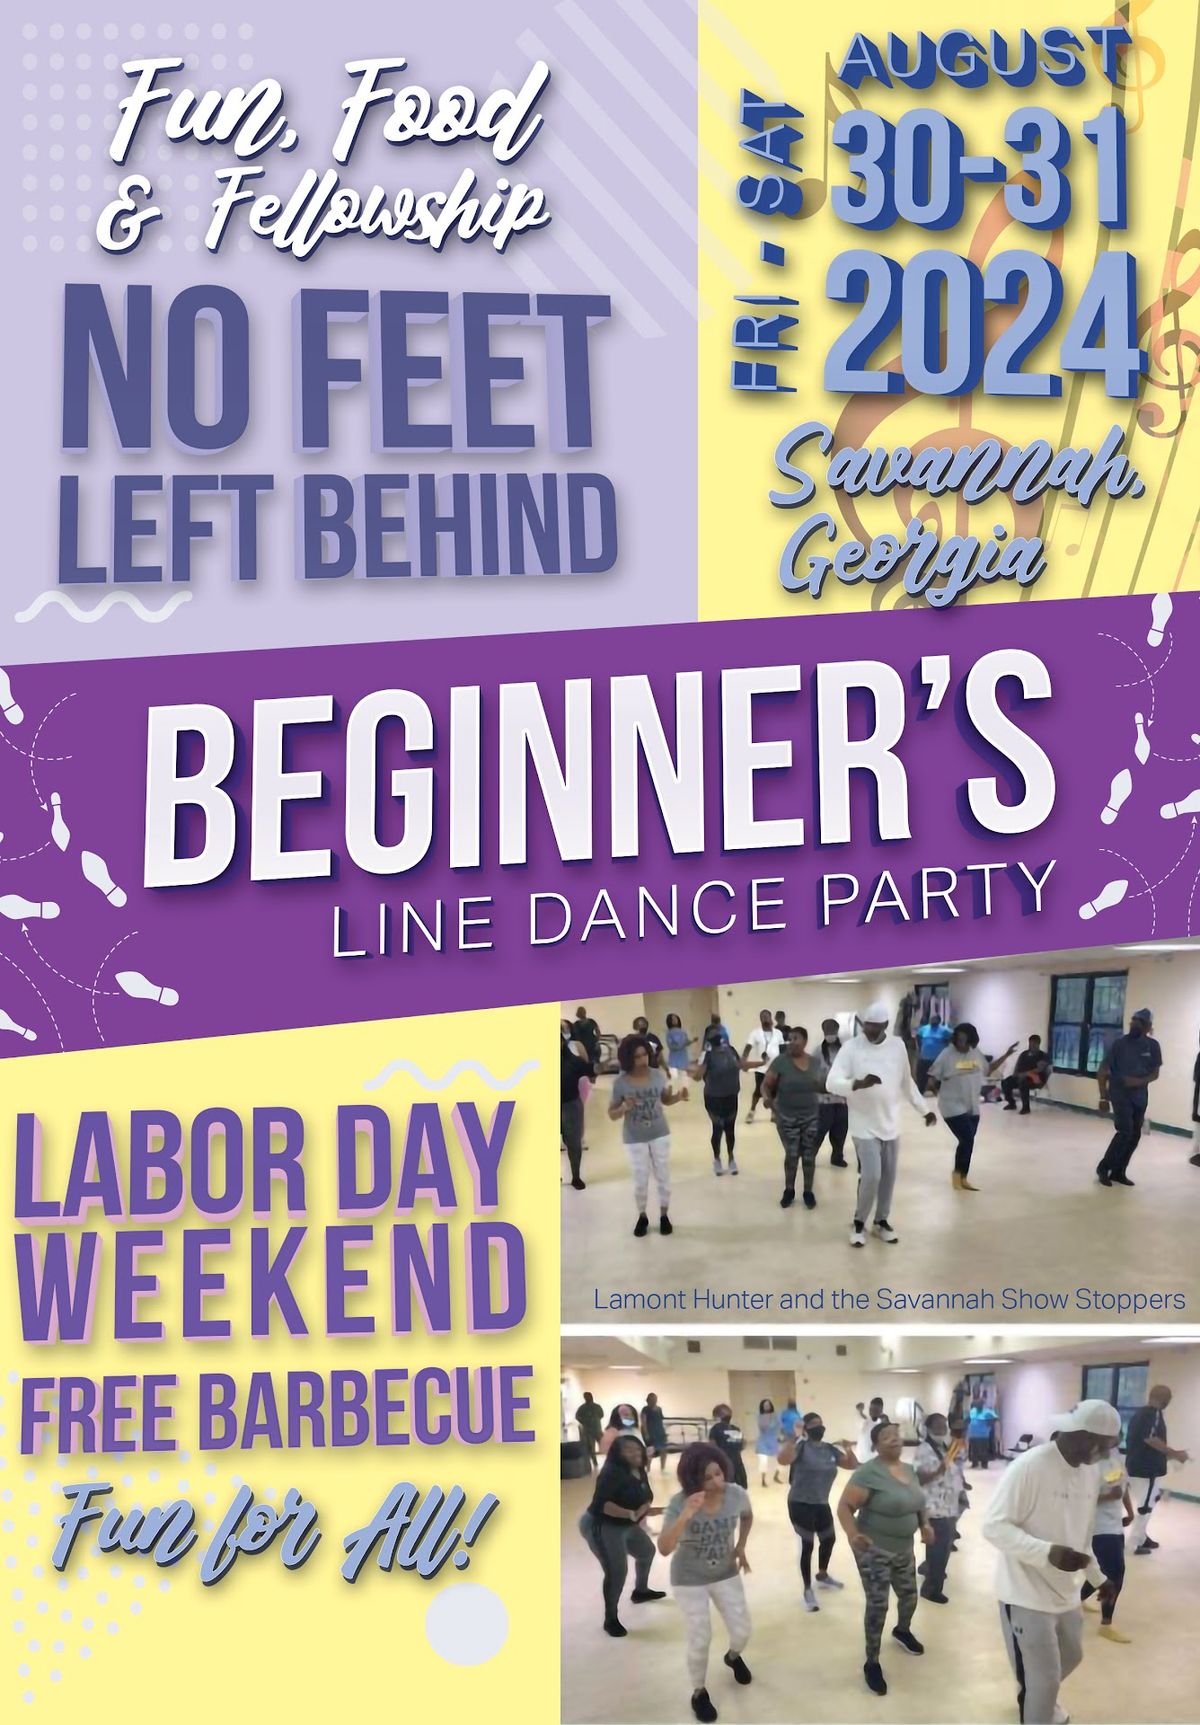 "No Feet Let Behind" Line Dance Party